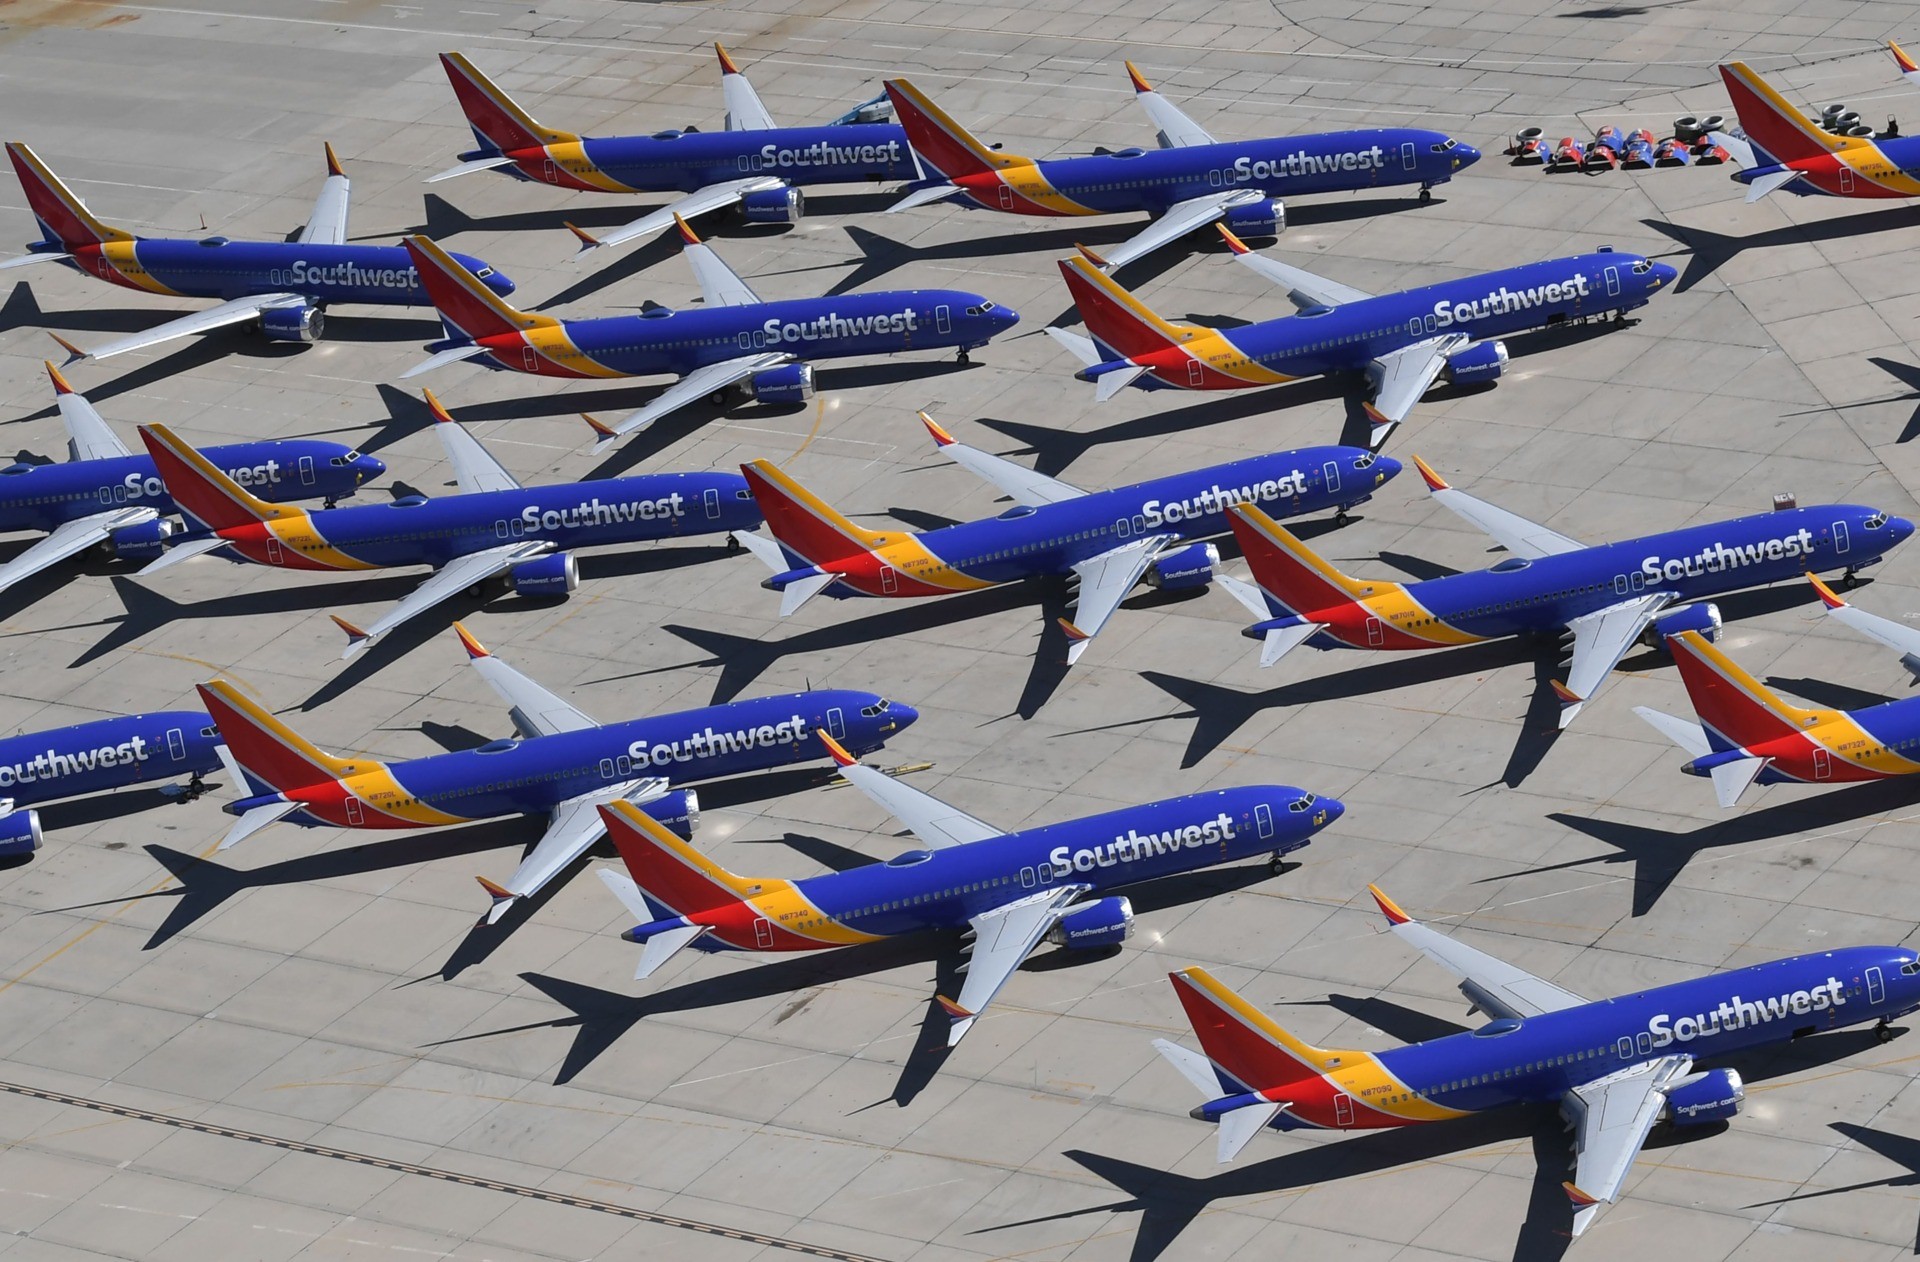 TOPSHOT - Southwest Airlines Boeing 737 MAX aircraft are parked on the tarmac after being grounded, at the Southern California Logistics Airport in Victorville, California on March 28, 2019. - After two fatal crashes in five months, Boeing is trying hard -- very hard -- to present itself as unfazed by the crisis that surrounds the company. The company's sprawling factory in Renton, Washington is a hive of activity on this sunny Wednesday, March 28, 2019, during a tightly-managed media tour as Boeing tries to communicate confidence that it has nothing to hide. Boeing gathered hundreds of pilots and reporters to unveil the changes to the MCAS stall prevention system, which has been implicated in the crashes in Ethiopia and Indonesia, as part of a charm offensive to restore the company's reputation. (Photo by Mark RALSTON / AFP) (Photo credit should read MARK RALSTON/AFP via Getty Images)